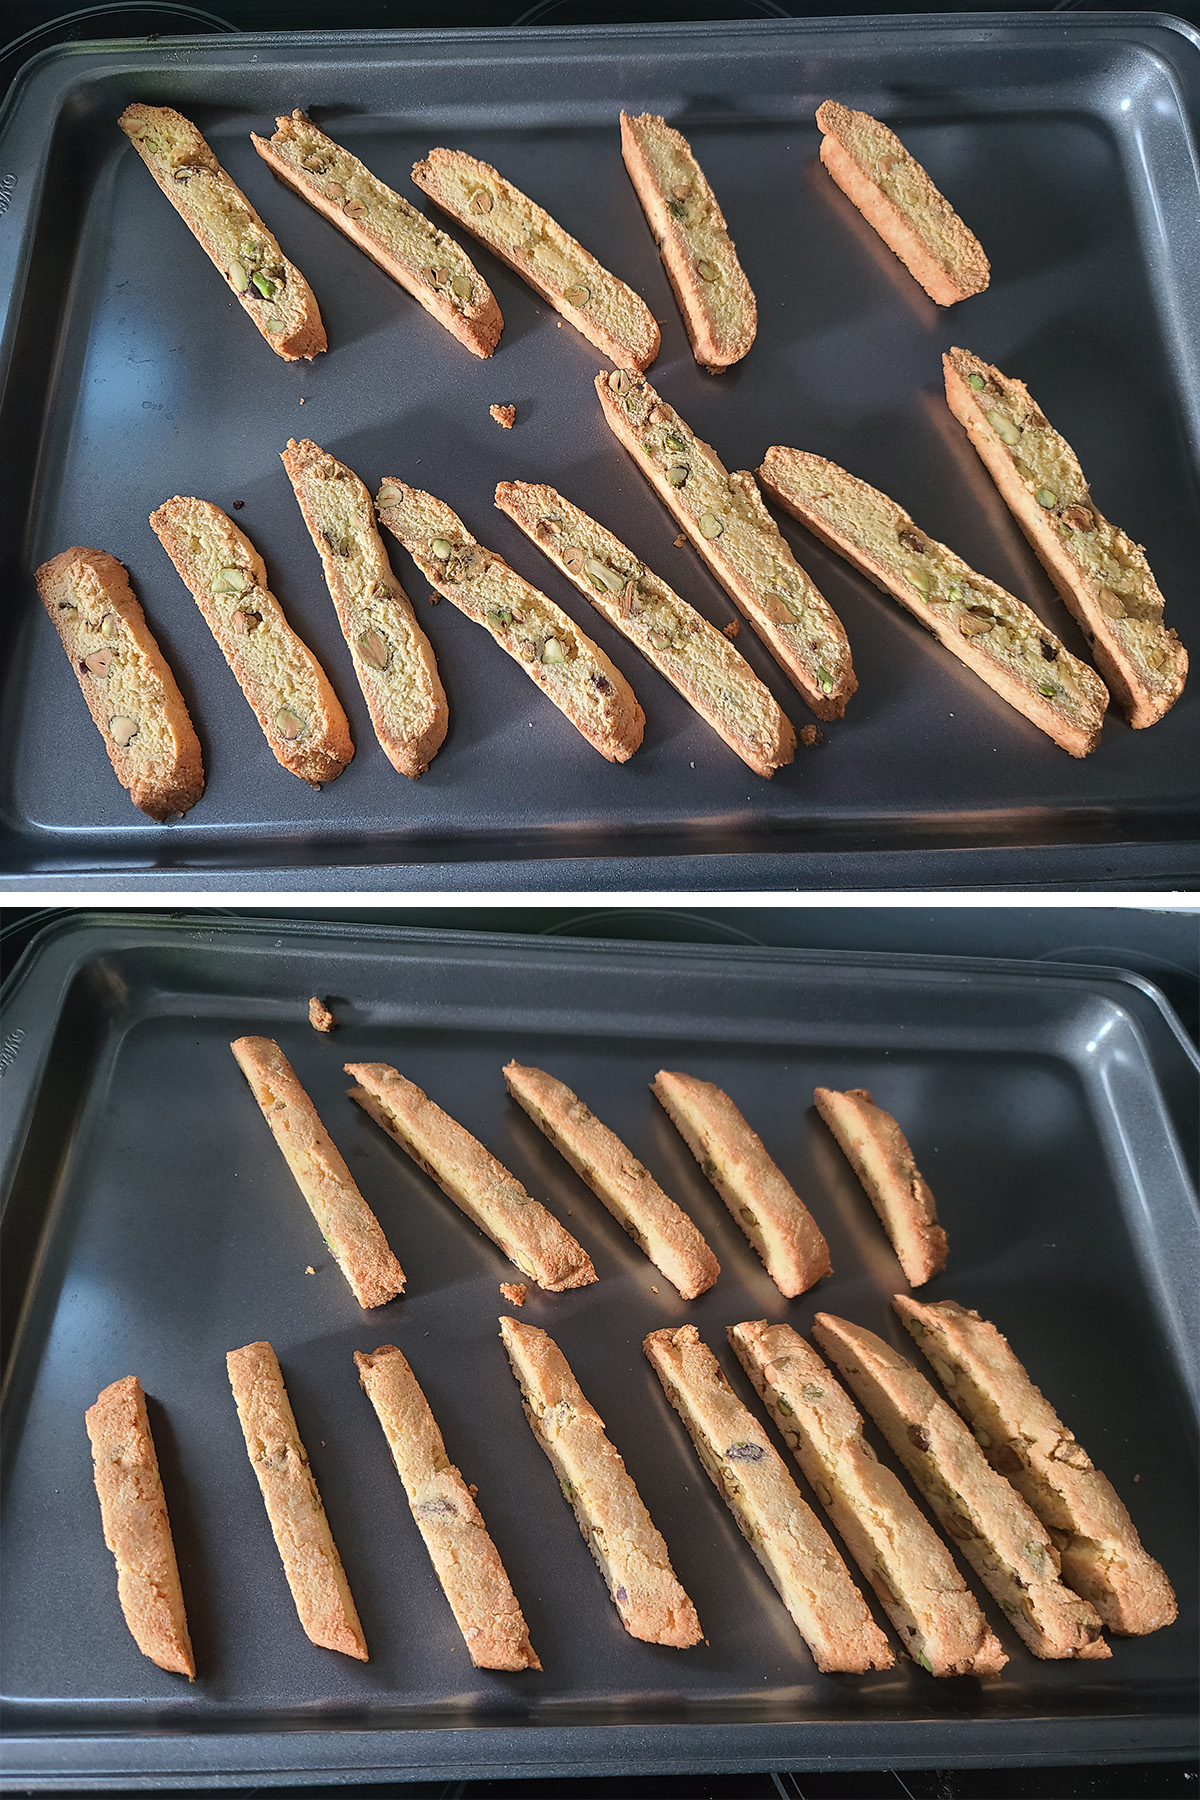 A 2 part image showing the twice baked biscotti on the pan.